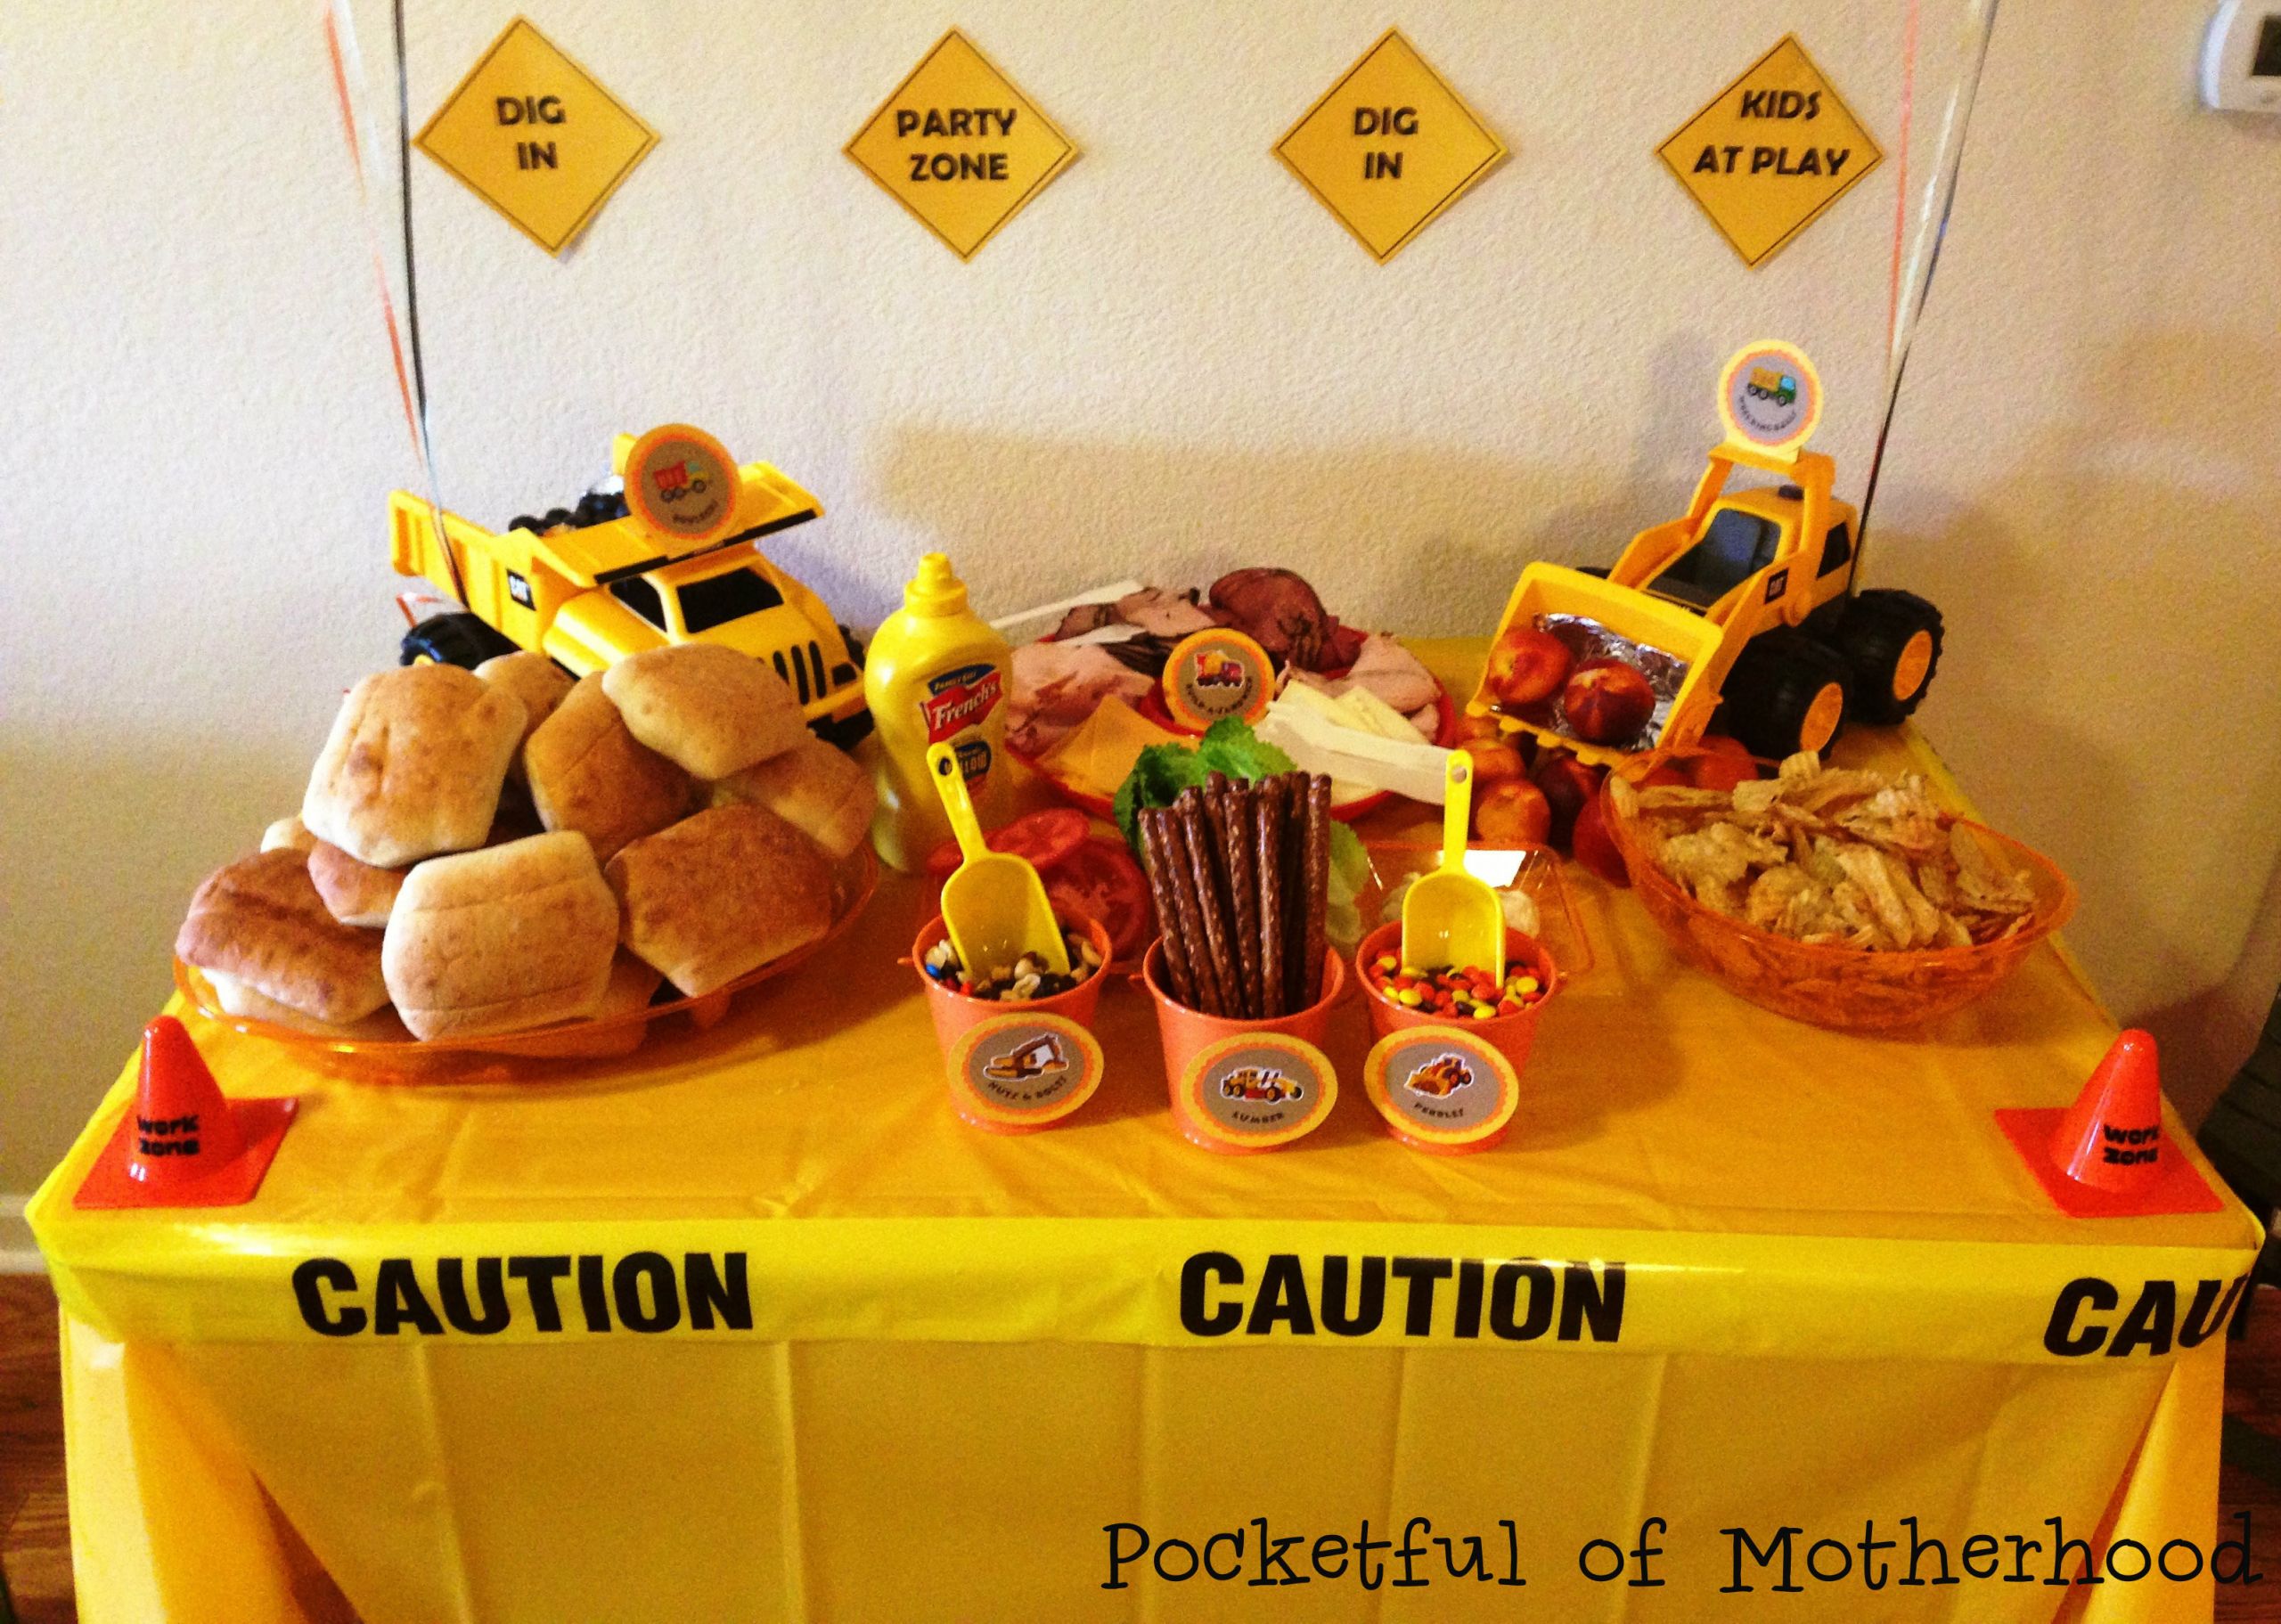 Construction Birthday Party Decorations
 Construction Themed Birthday Party